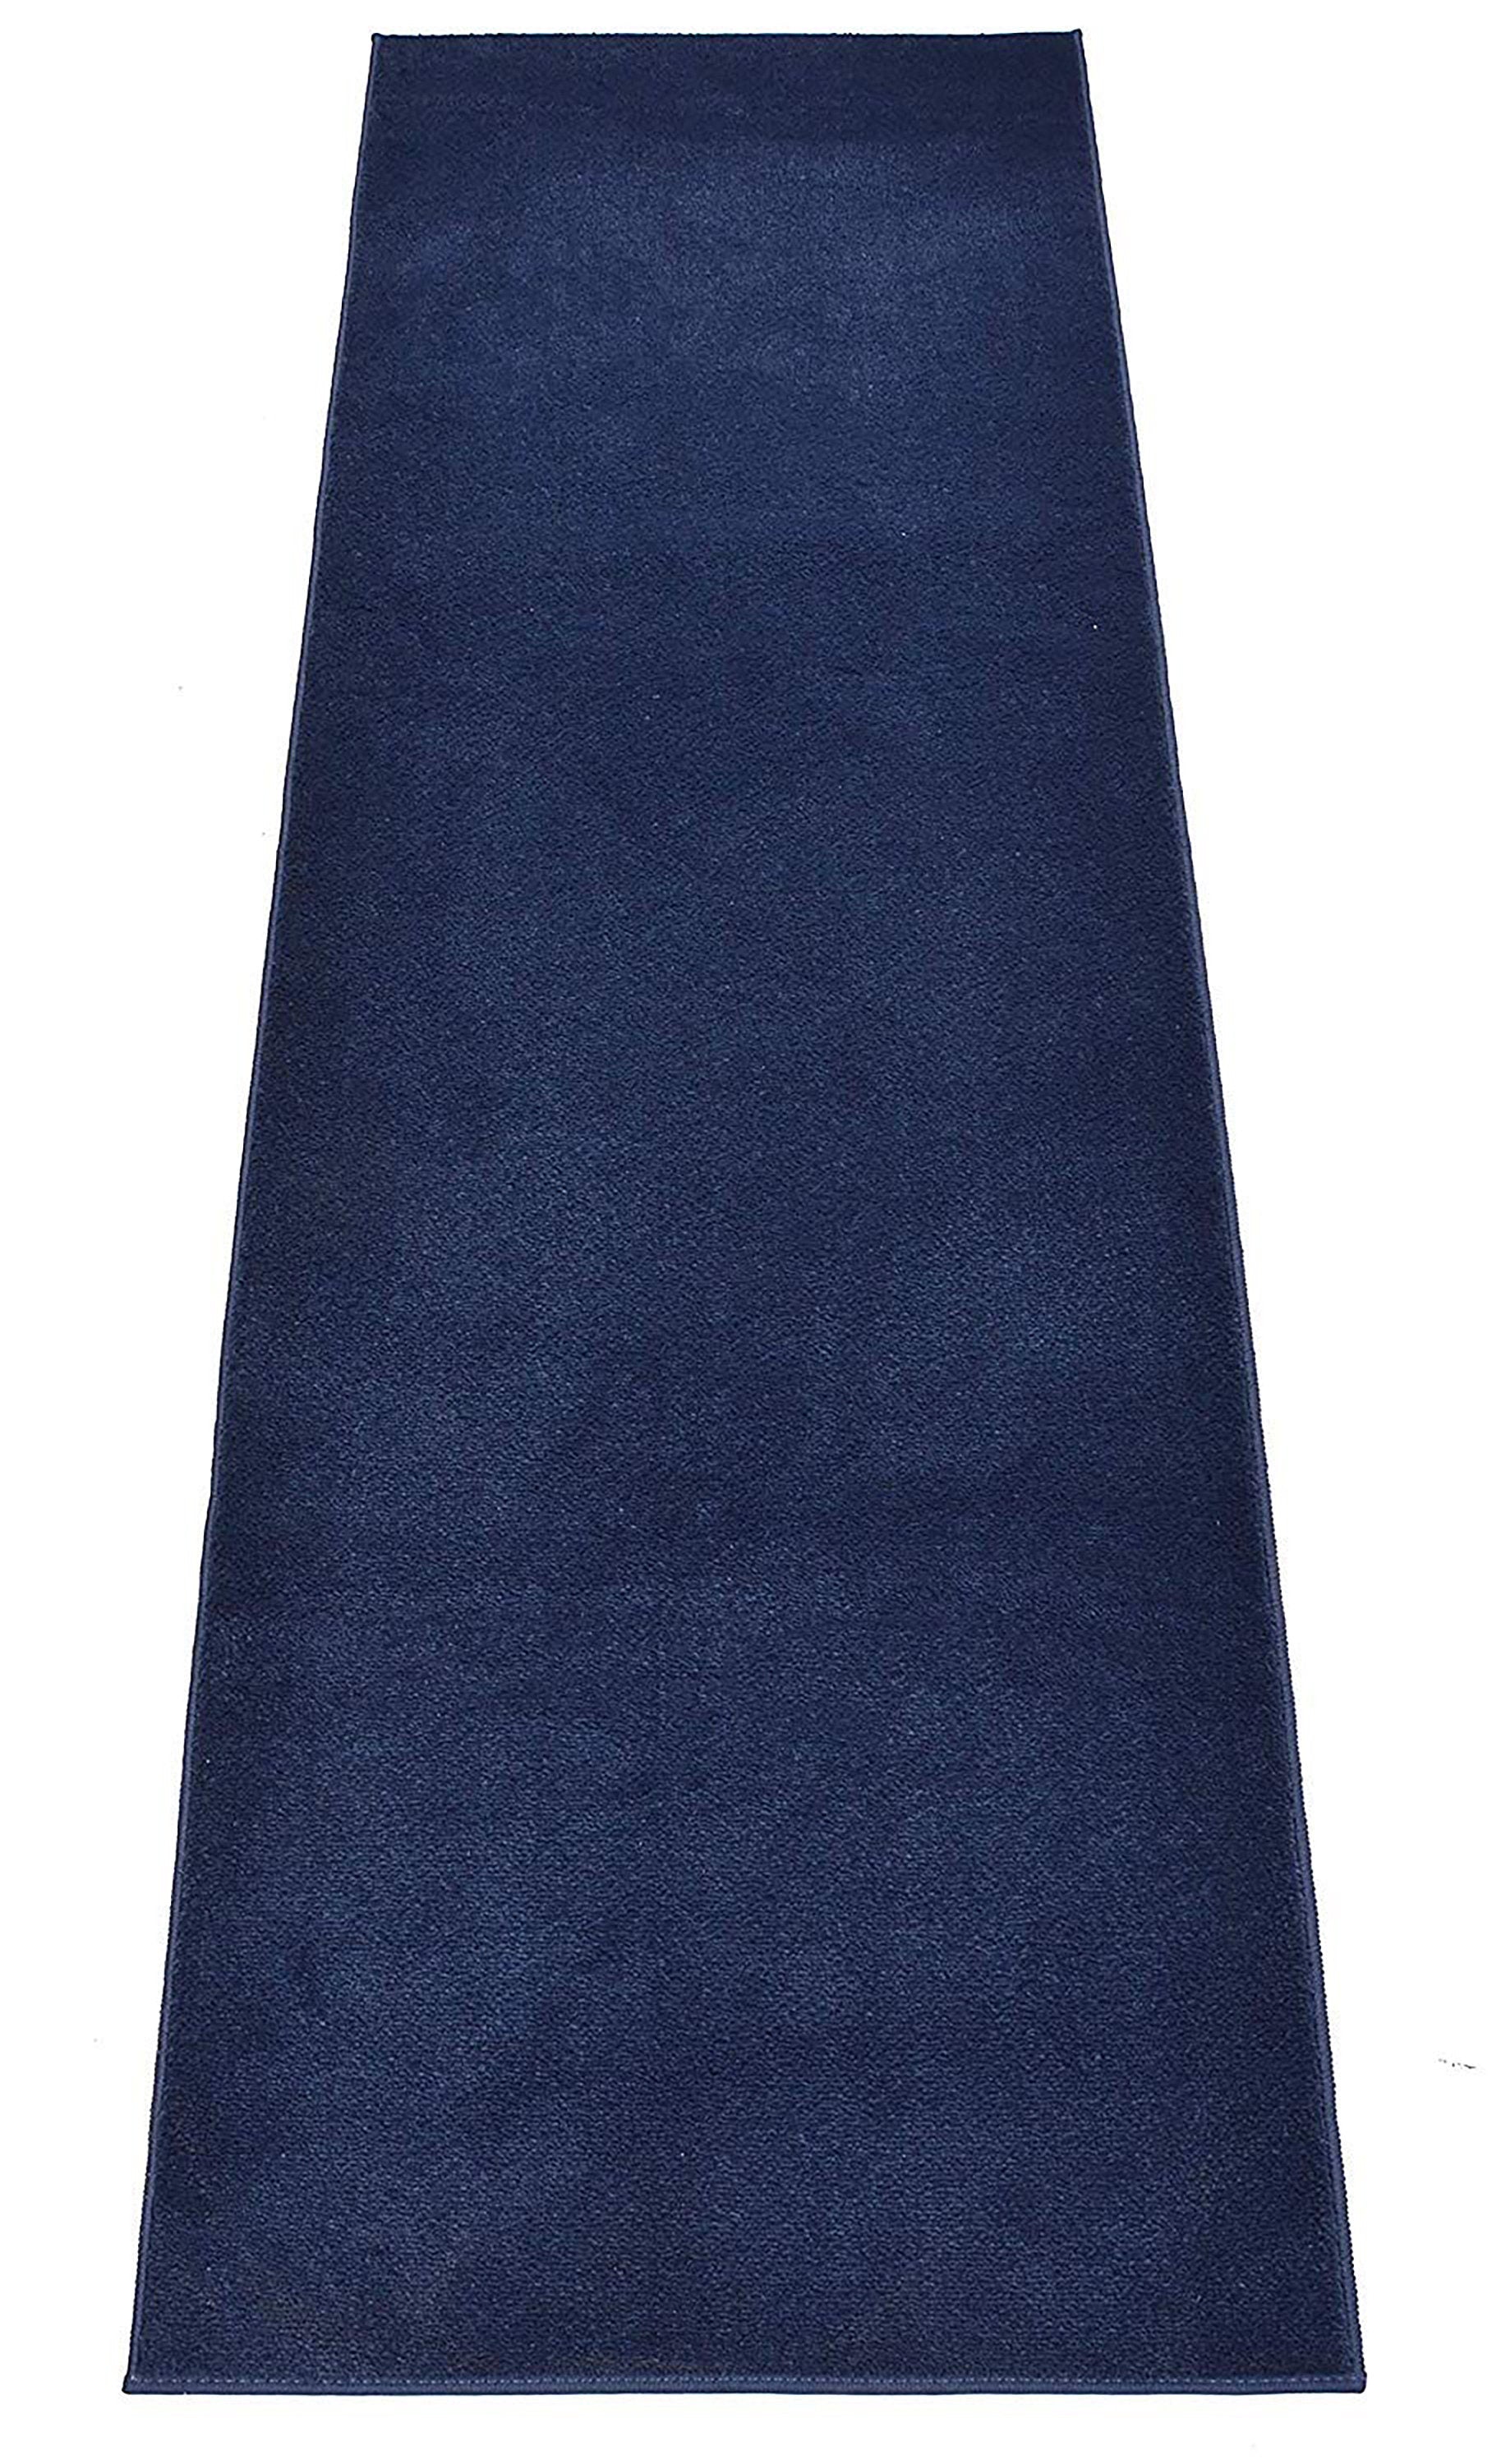 Machine Washable Custom Size Runner Rug Solid Navy Blue Color Skid Resistant Rug Runner Customize Up to 50 Feet and 36 Inch Width Runner Rug-4